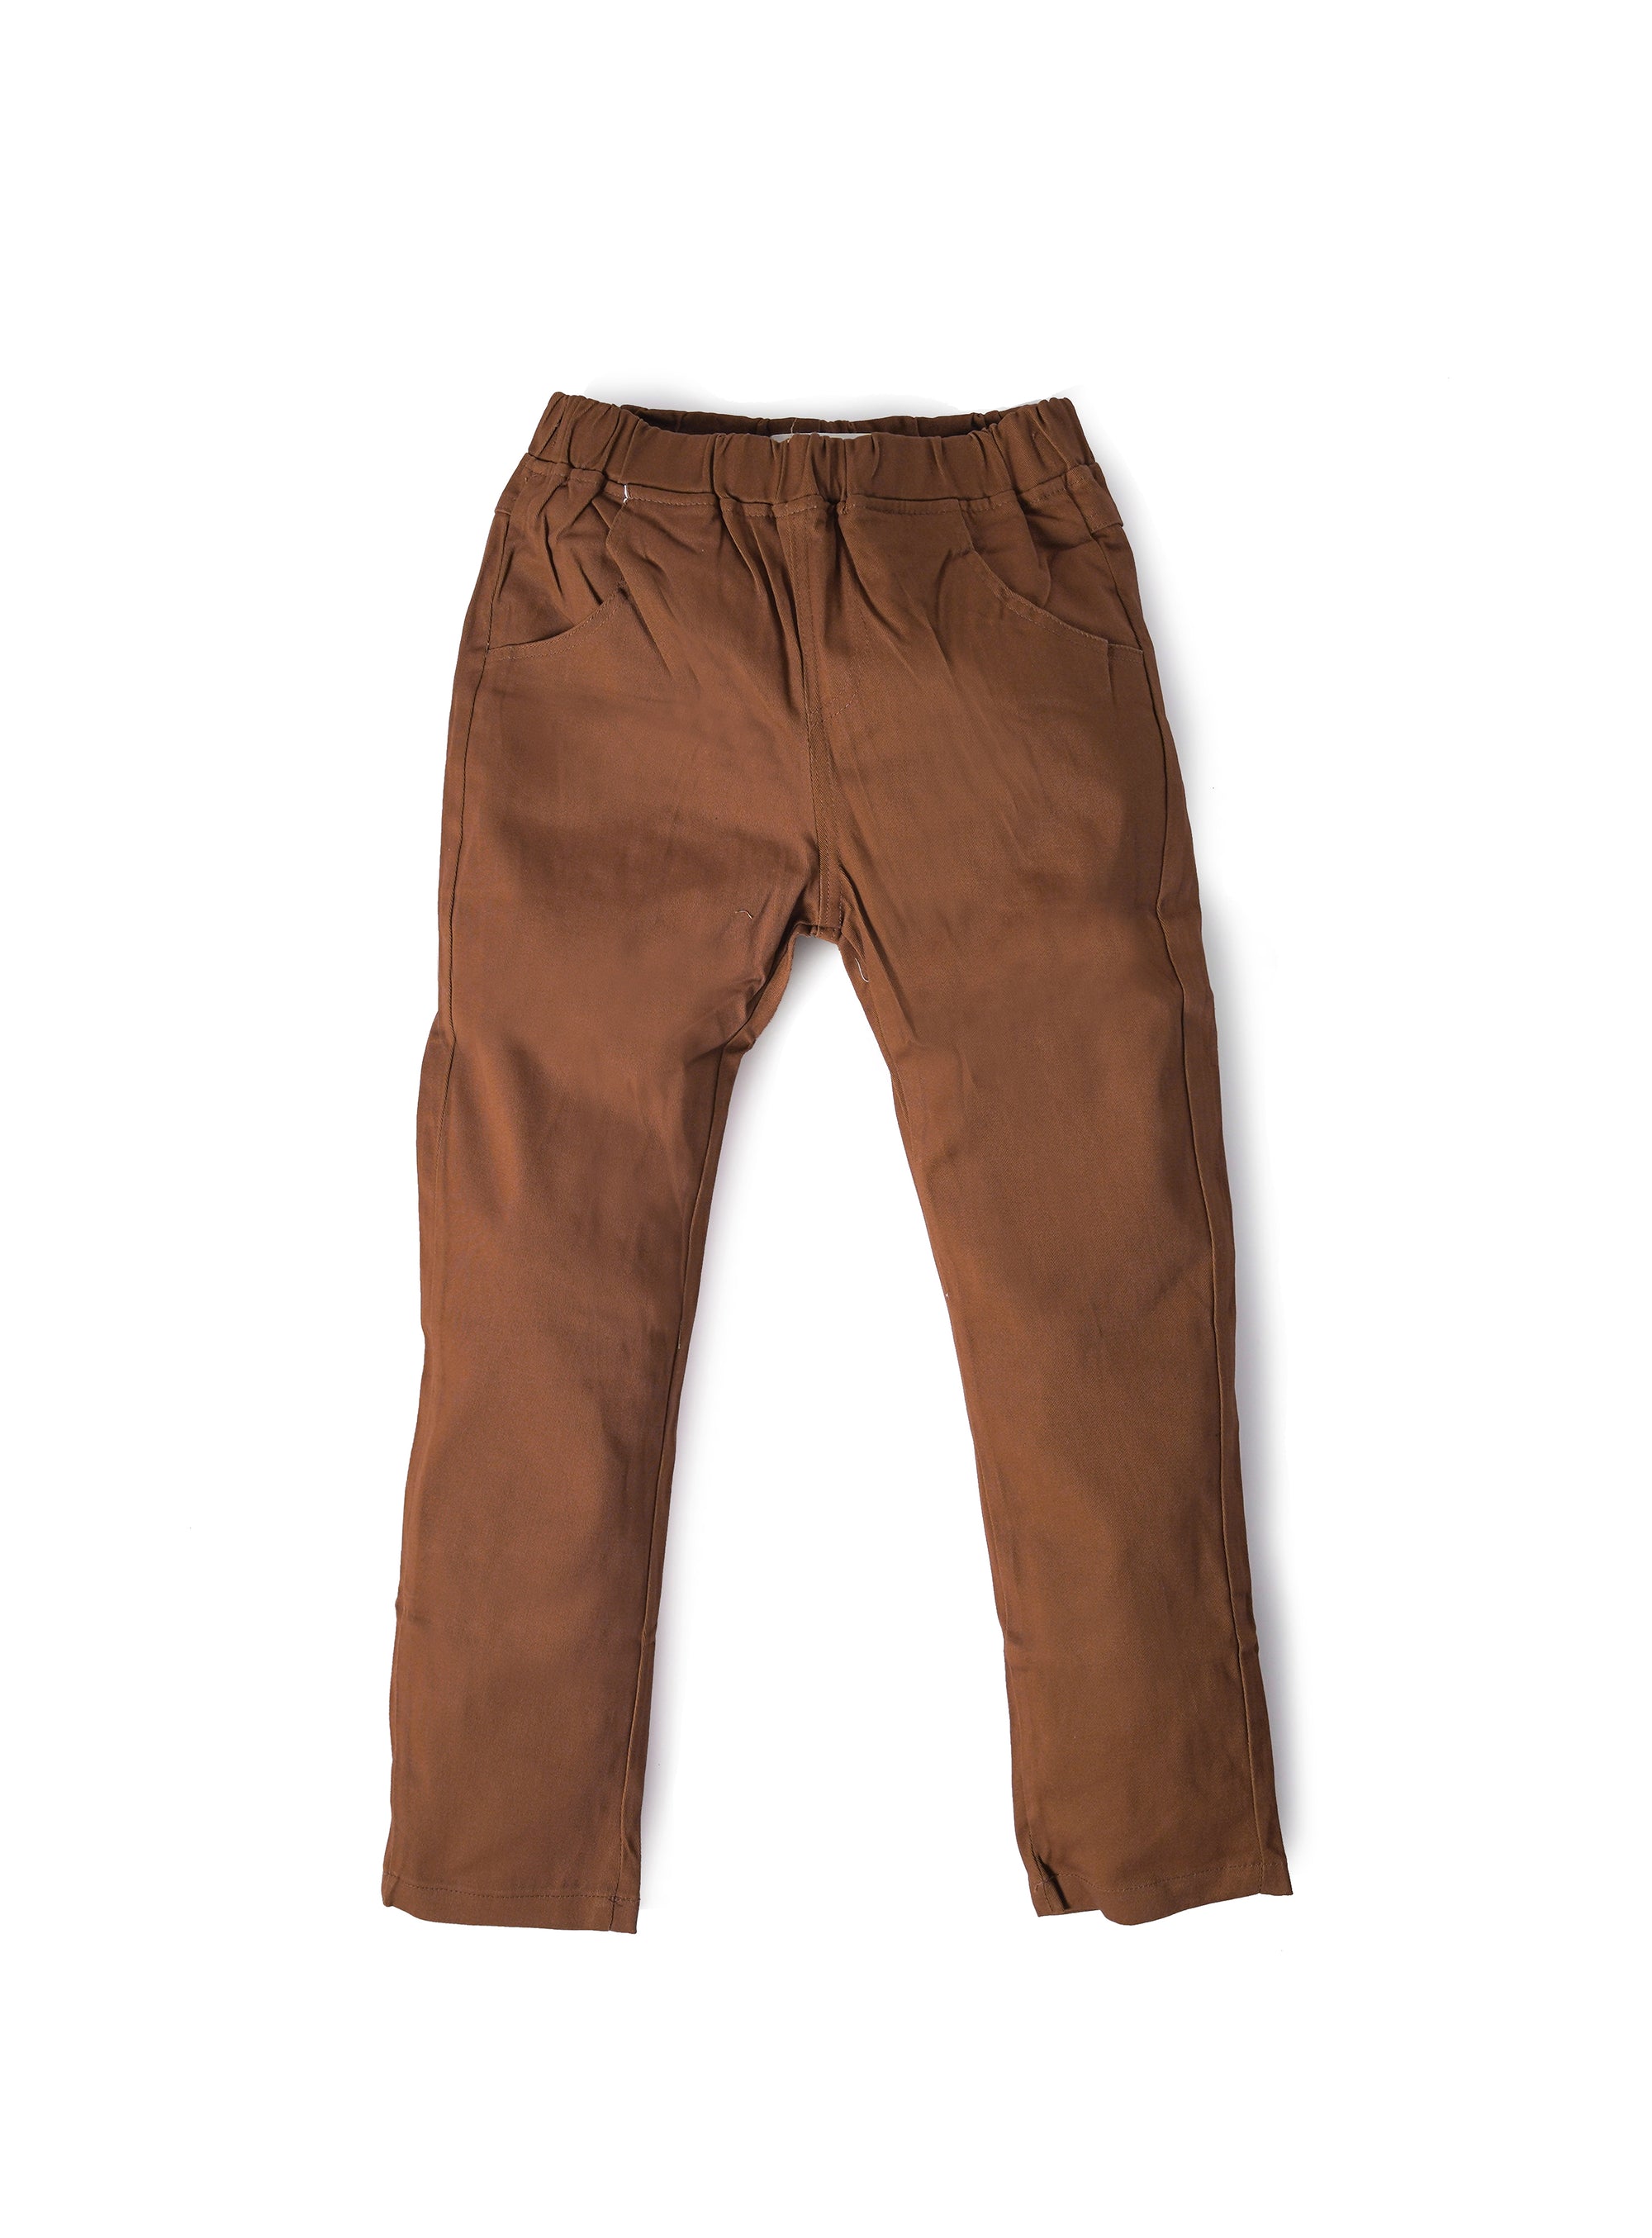 caramel brown chinos with stretchable waist